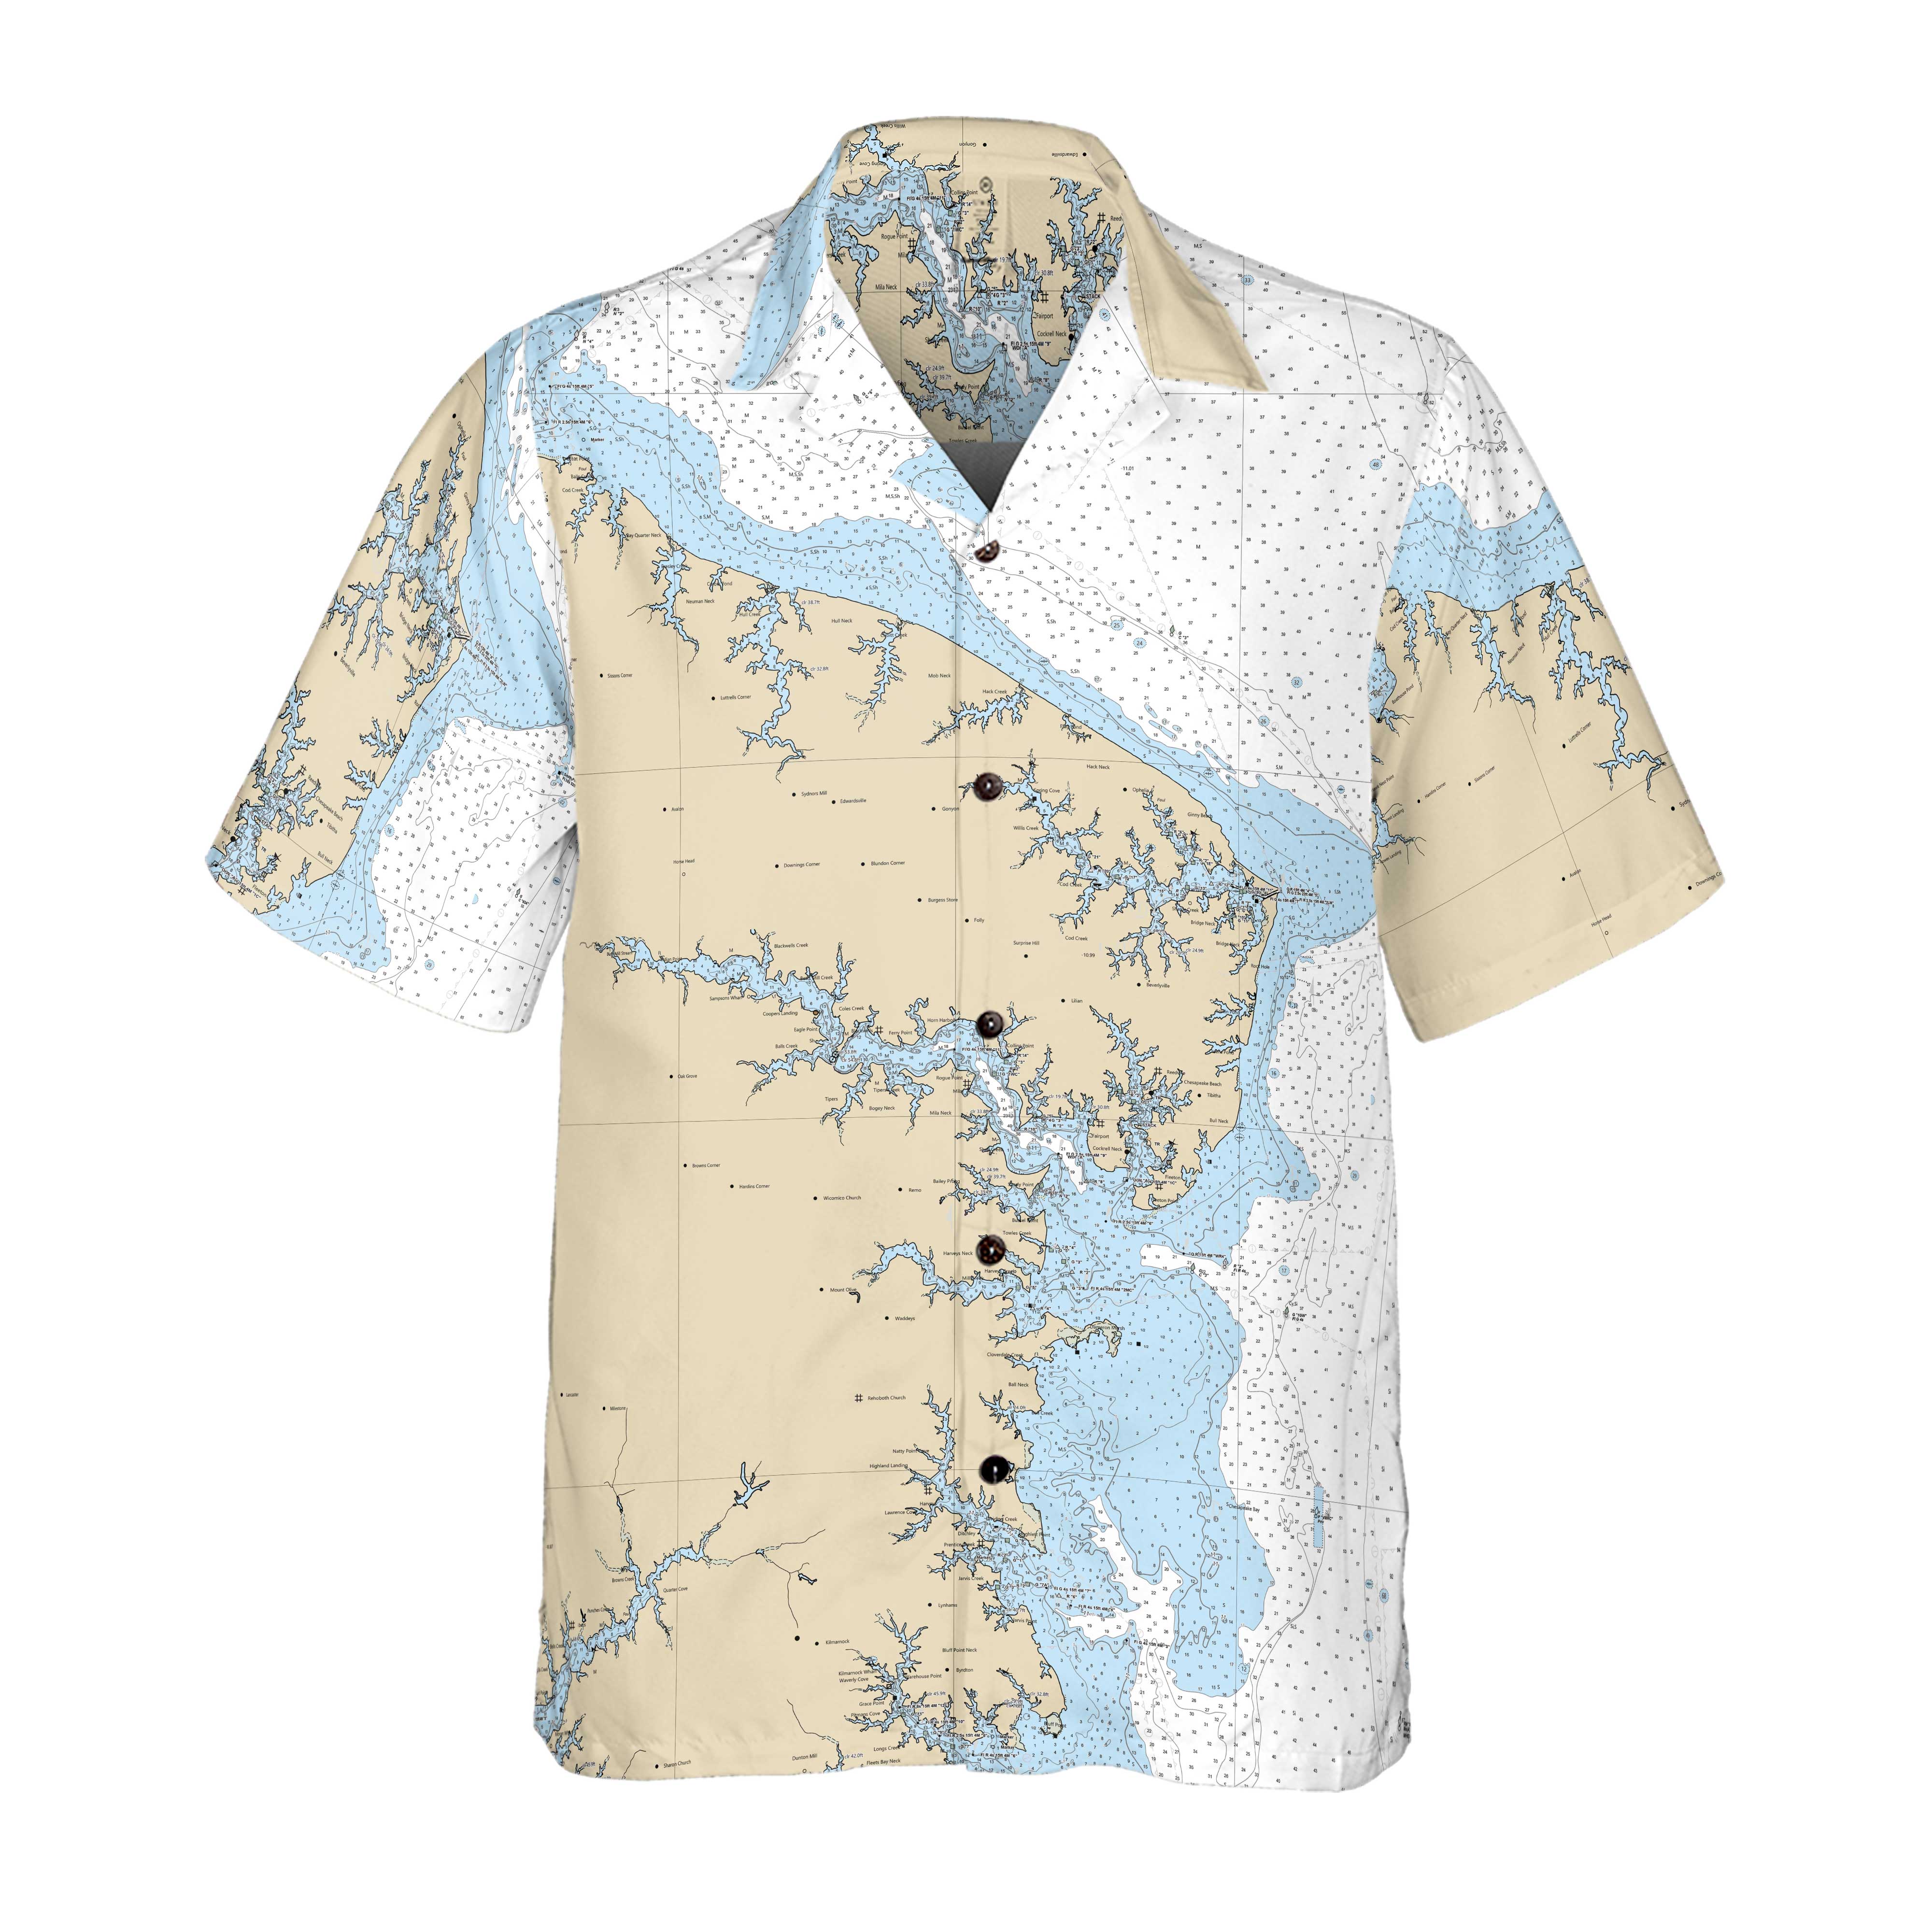 The Northumberland Virginia Coconut Button Camp Shirt